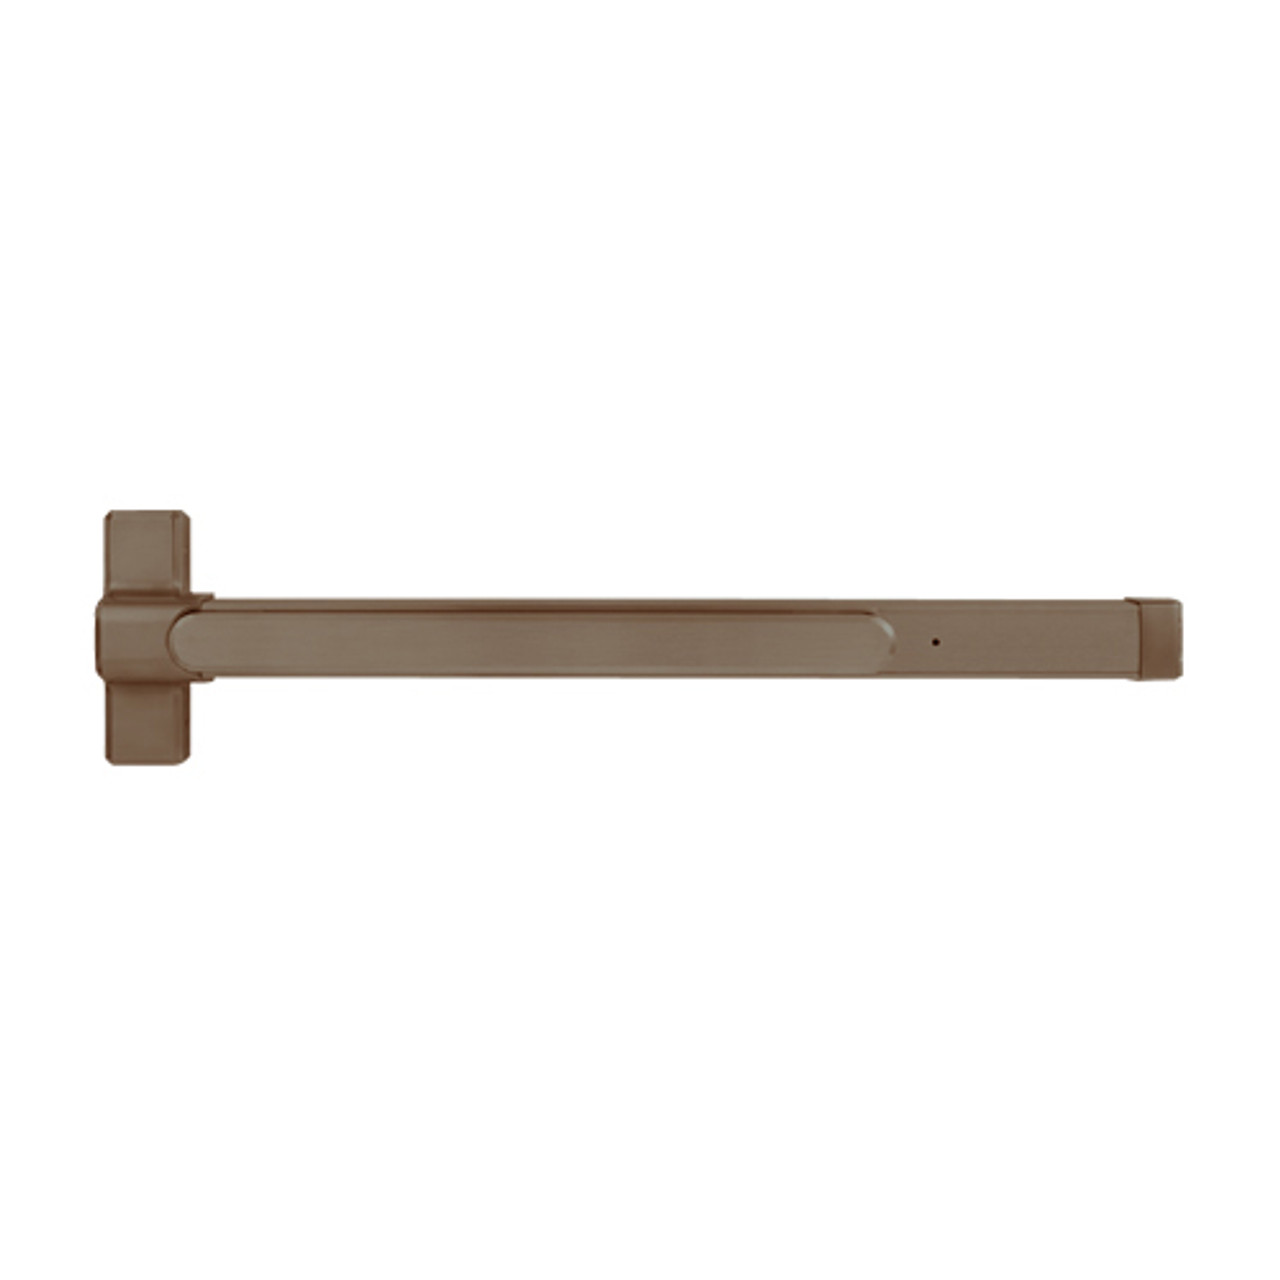 QED129LR-36-7-313AN Stanley QED100 Series Heavy Duty Concealed Vertical Rod Fire Rated Exit Device in Anodized Duranodic Bronze Finish